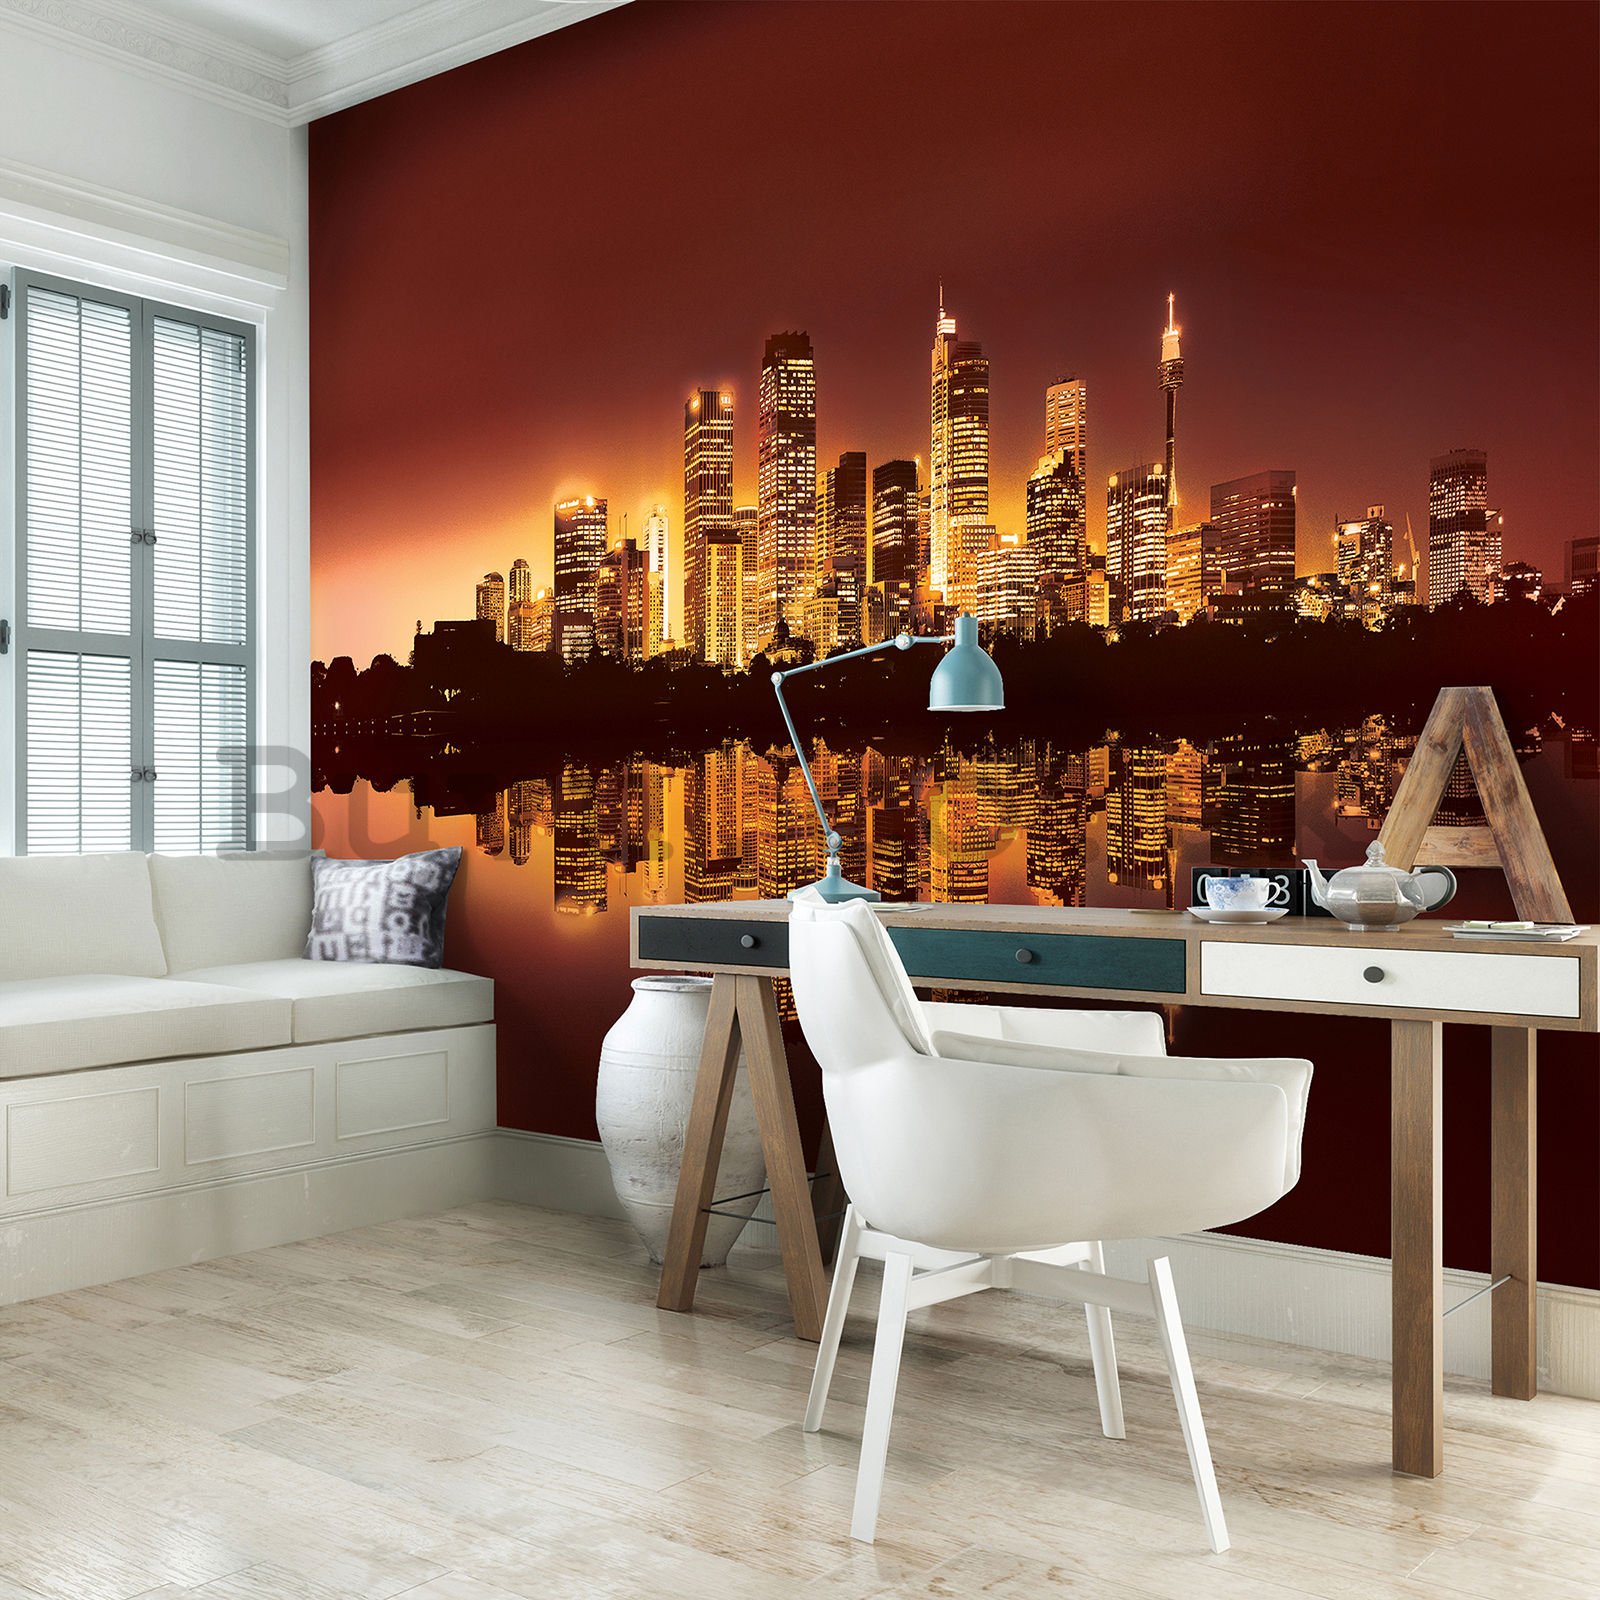 Wall mural vlies: View on the city (sunset) - 152,5x104 cm